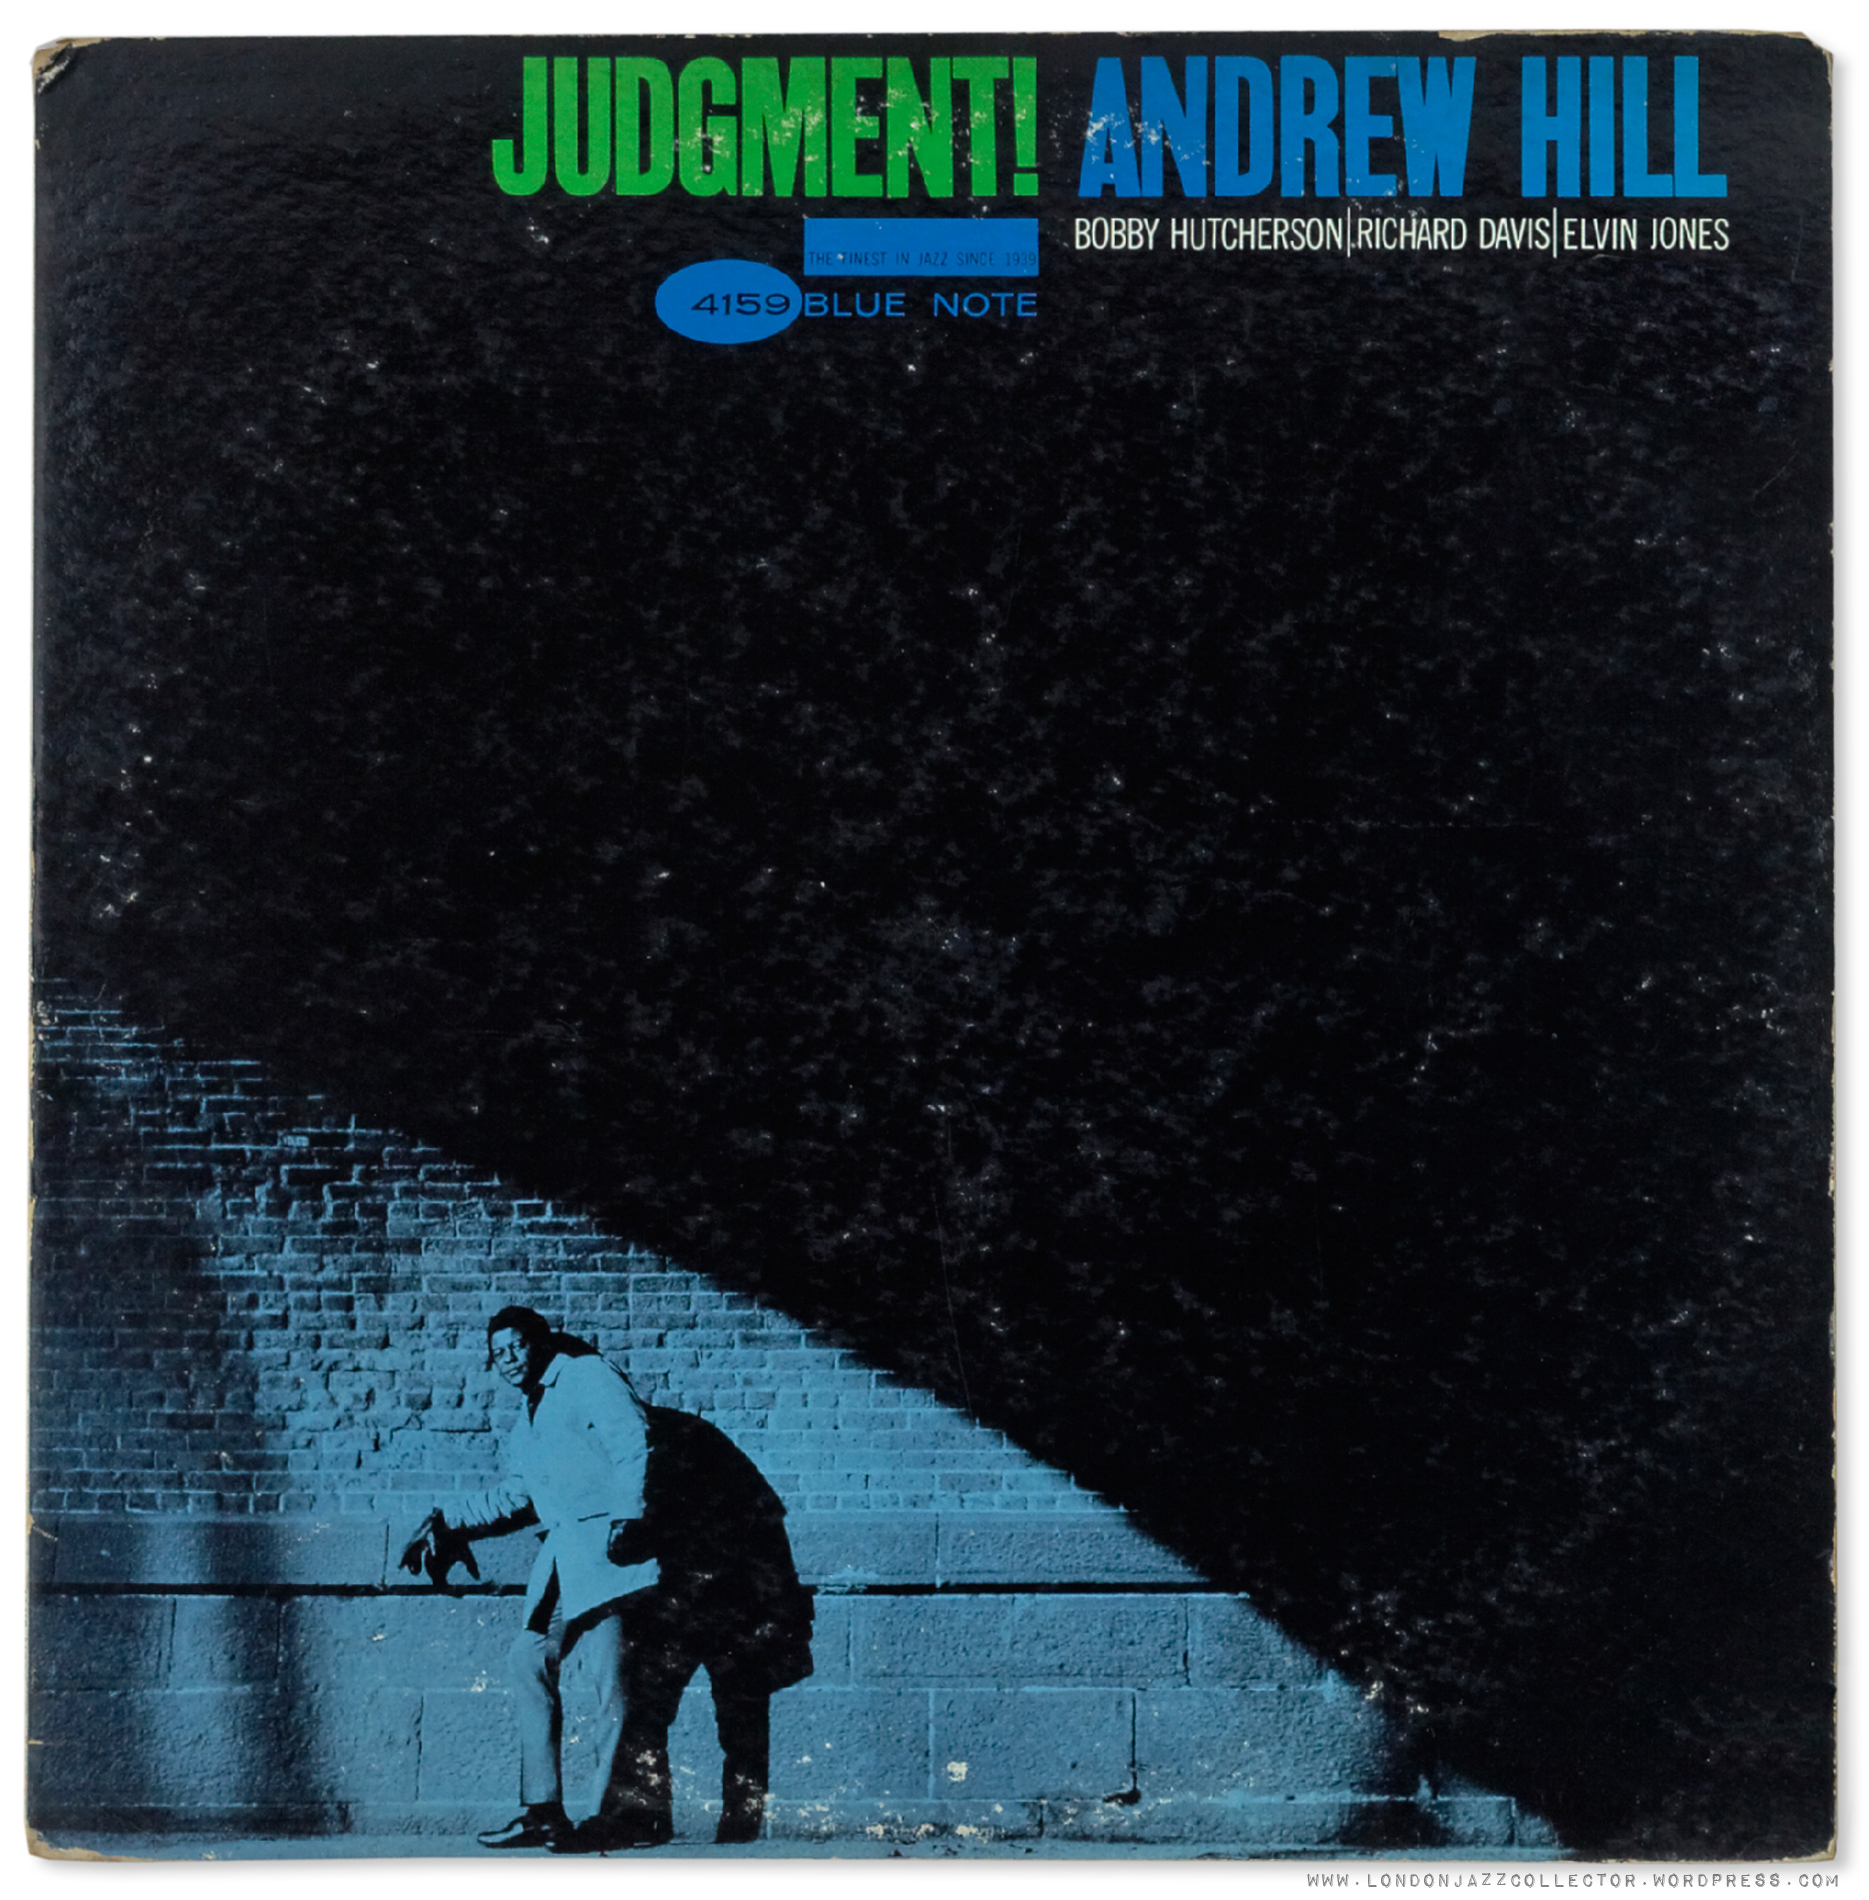 Andrew Hill: Judgement! (1964) Blue Note | LondonJazzCollector